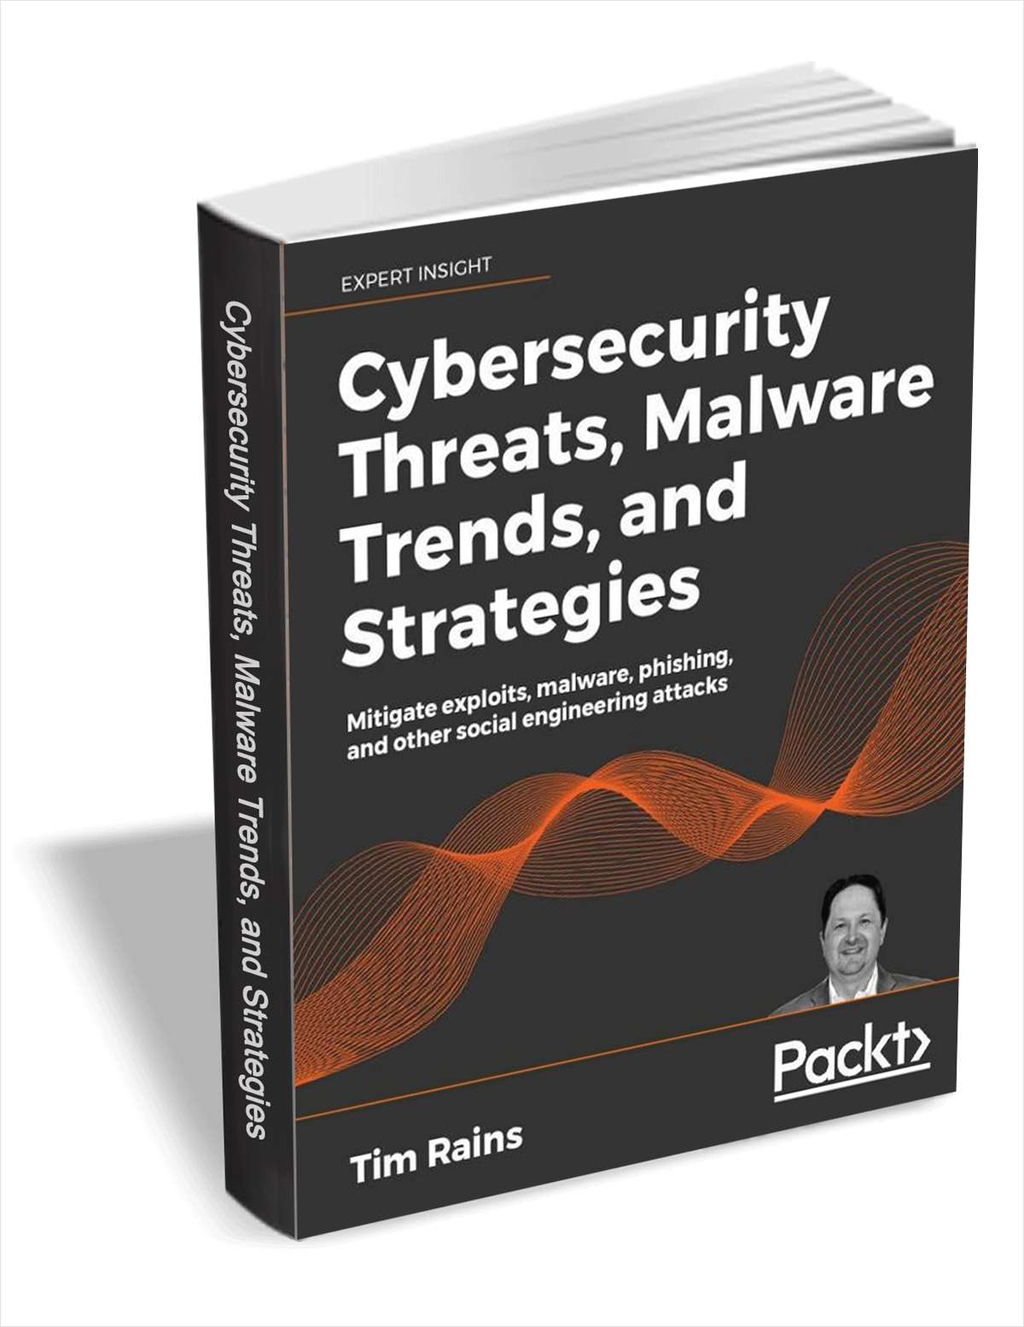 Cybersecurity Threats, Malware Trends, and Strategies ($22.00 Value) FREE for a Limited Time Screenshot